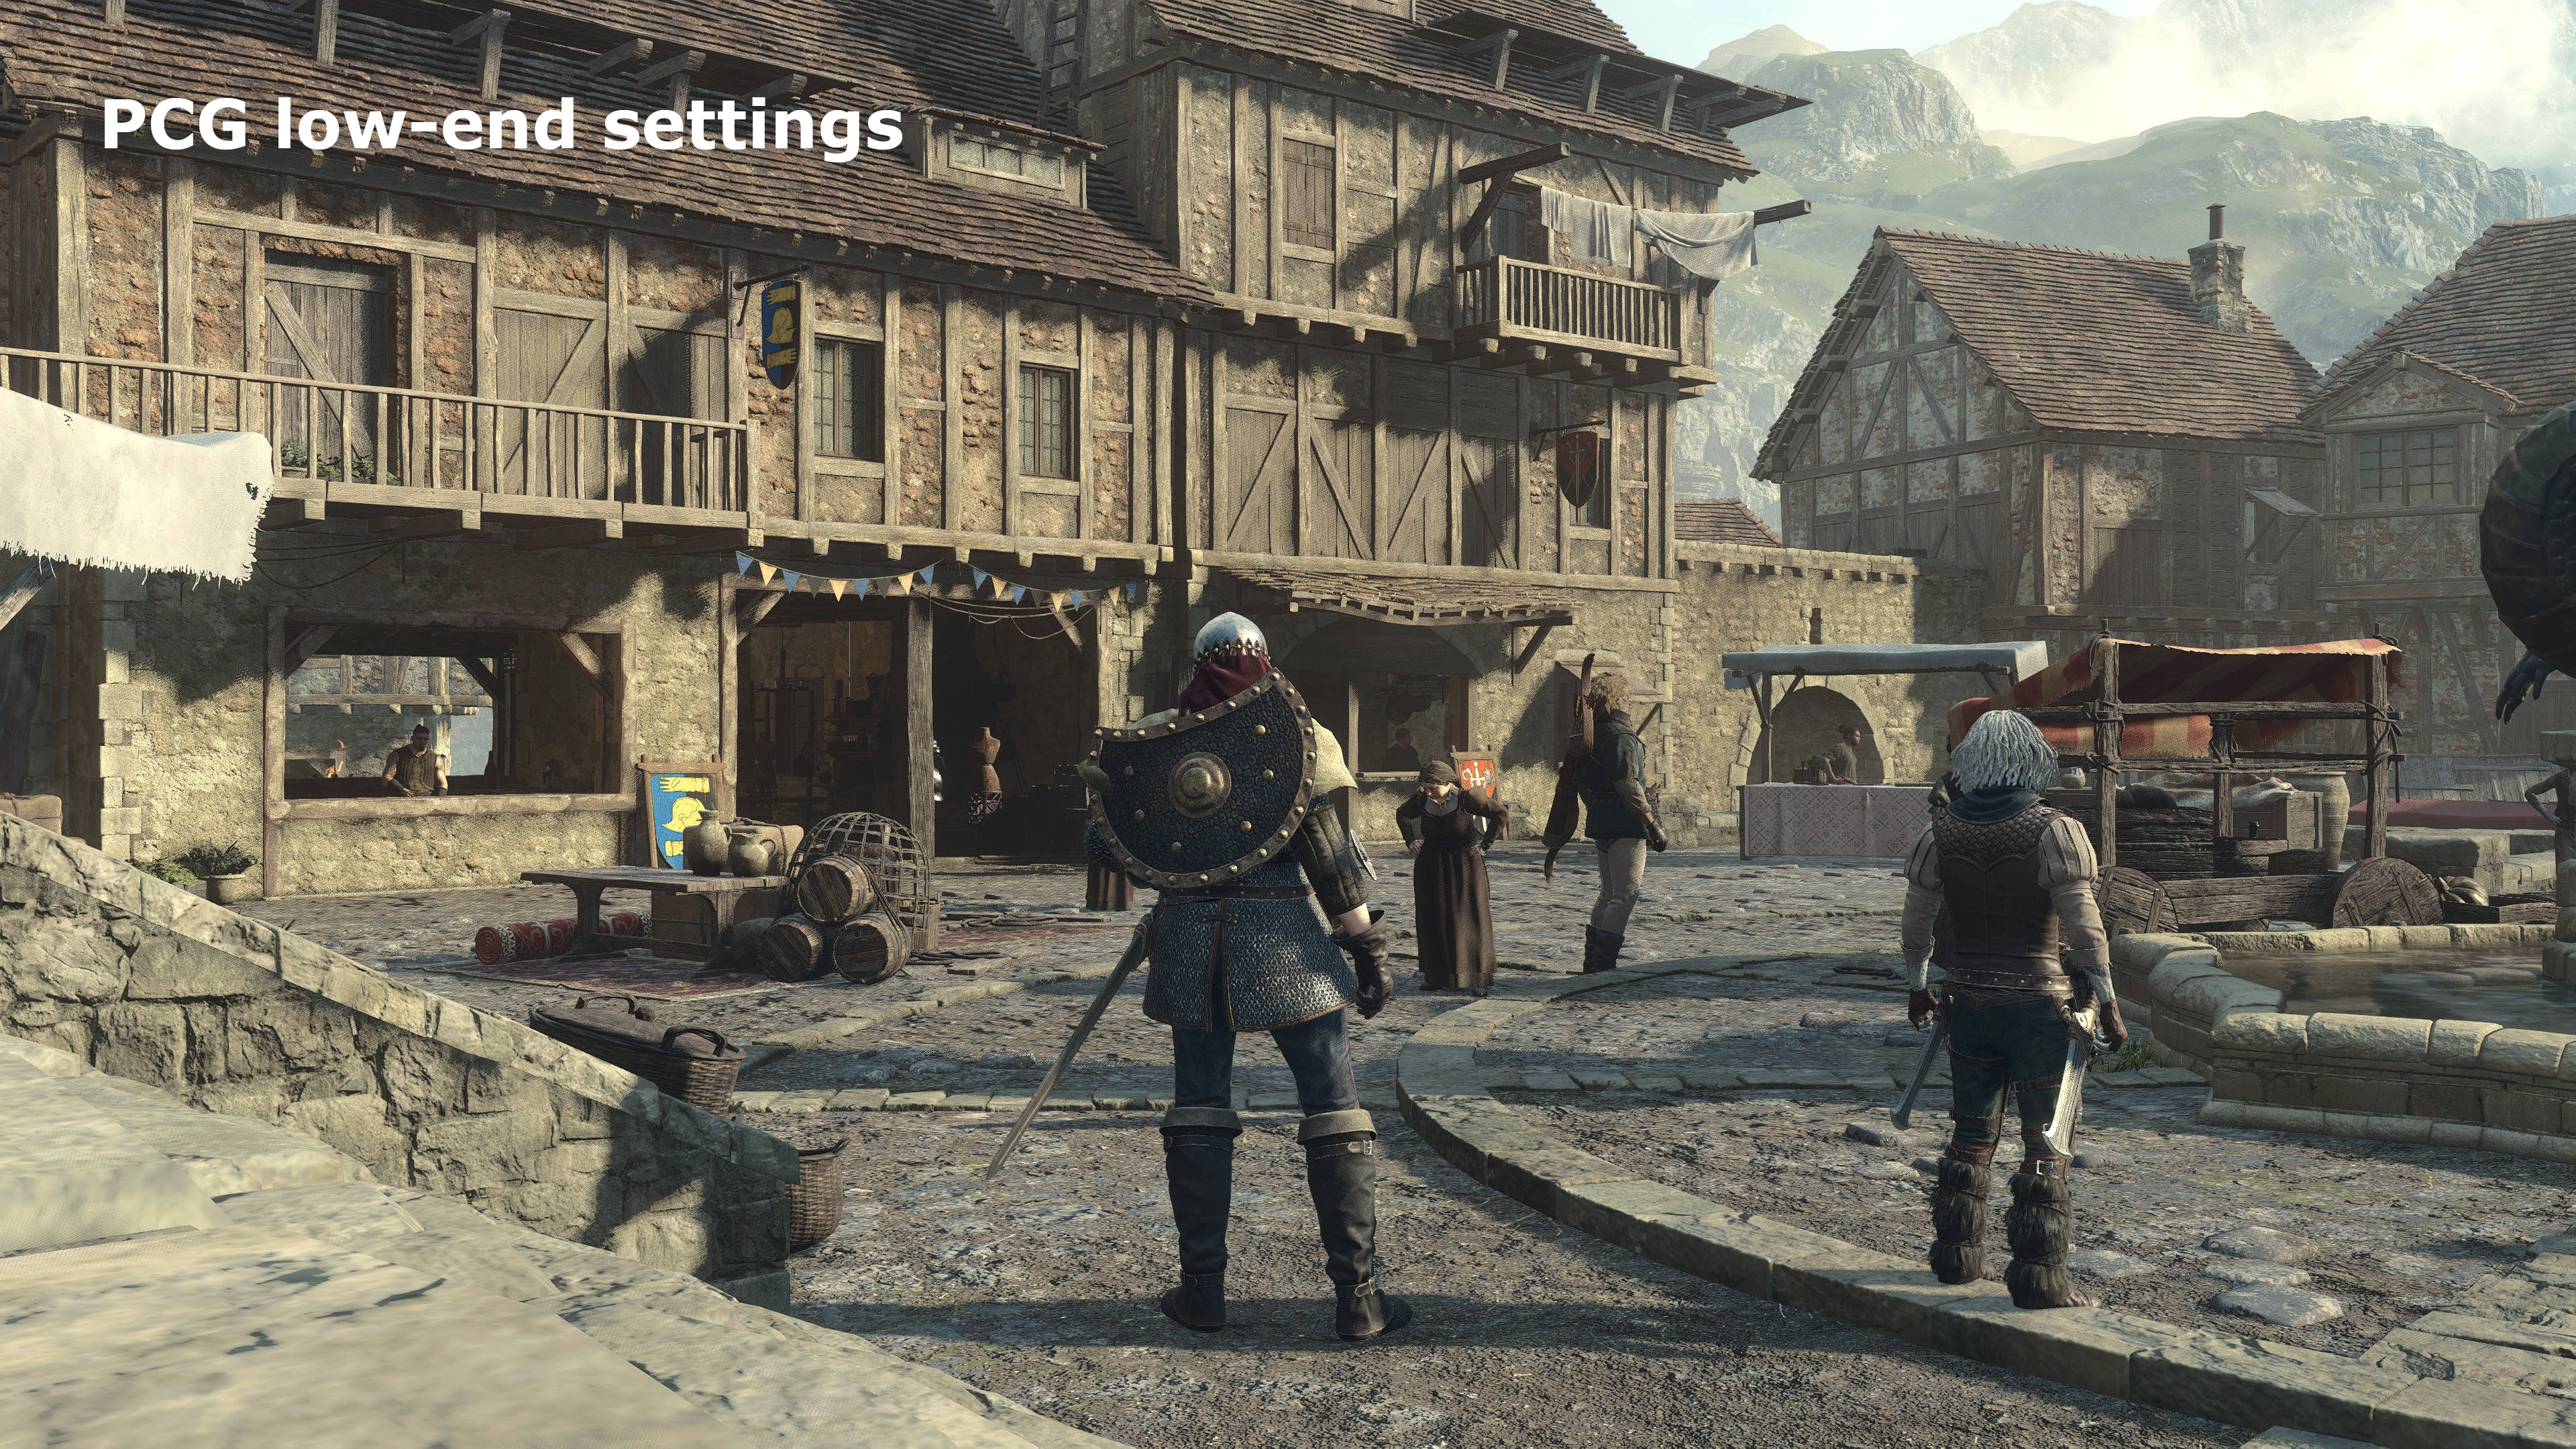 Screenshots from Dragon's Dogma 2 highlighting the visual changes that the game's graphics settings have